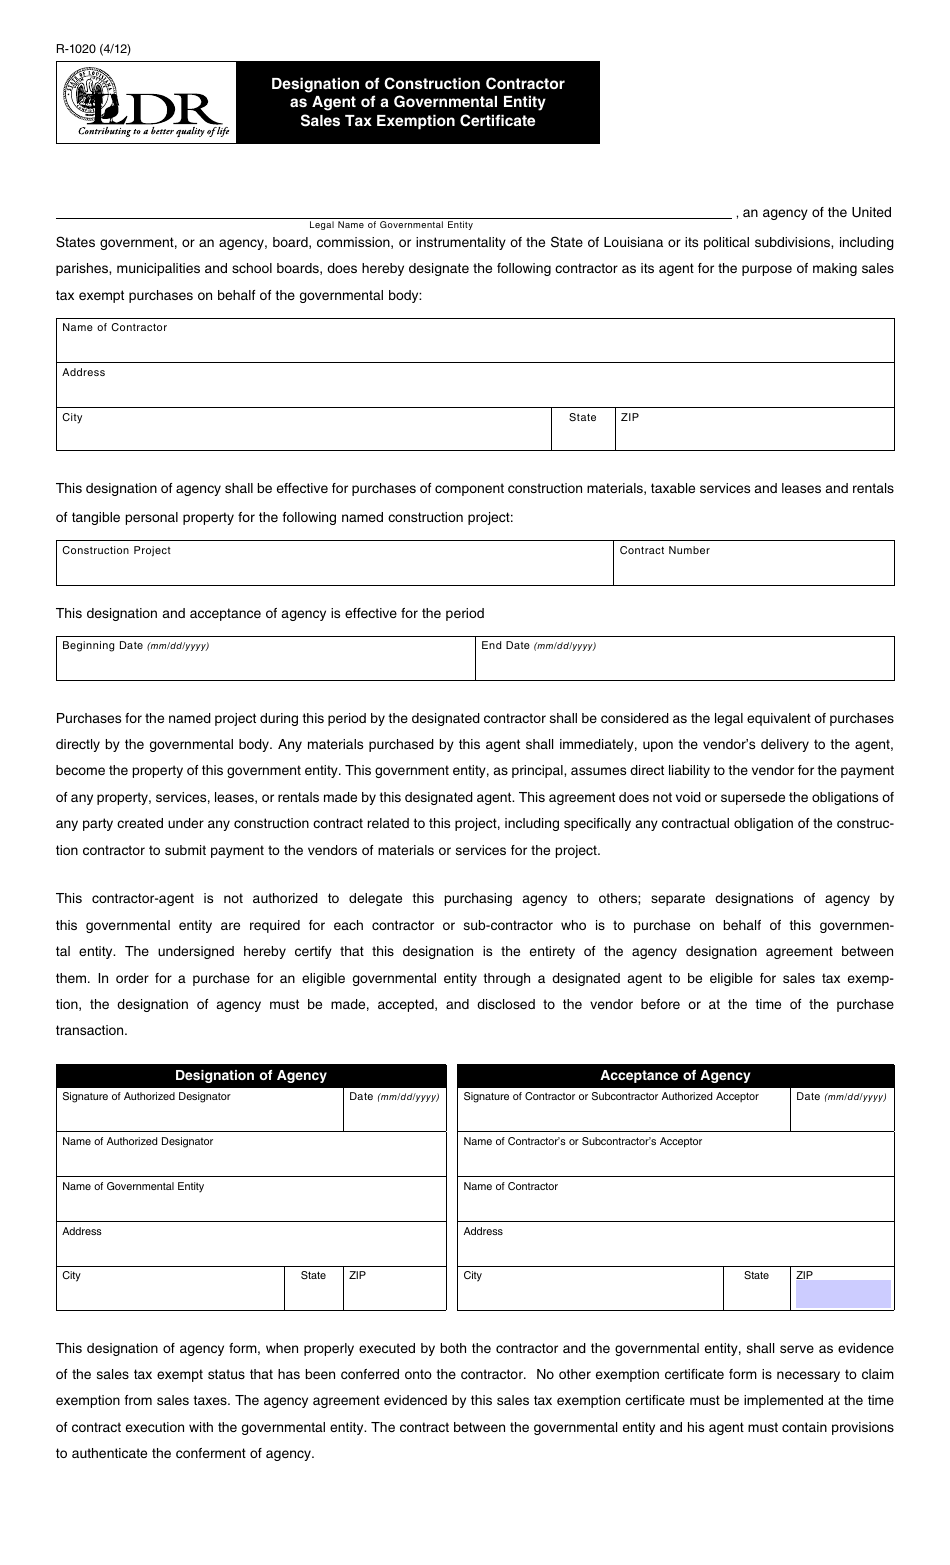 Form R-1020 Designation of Construction Contractor as Agent of a Governmental Entity Sales Tax Exemption Certificate - Louisiana, Page 1